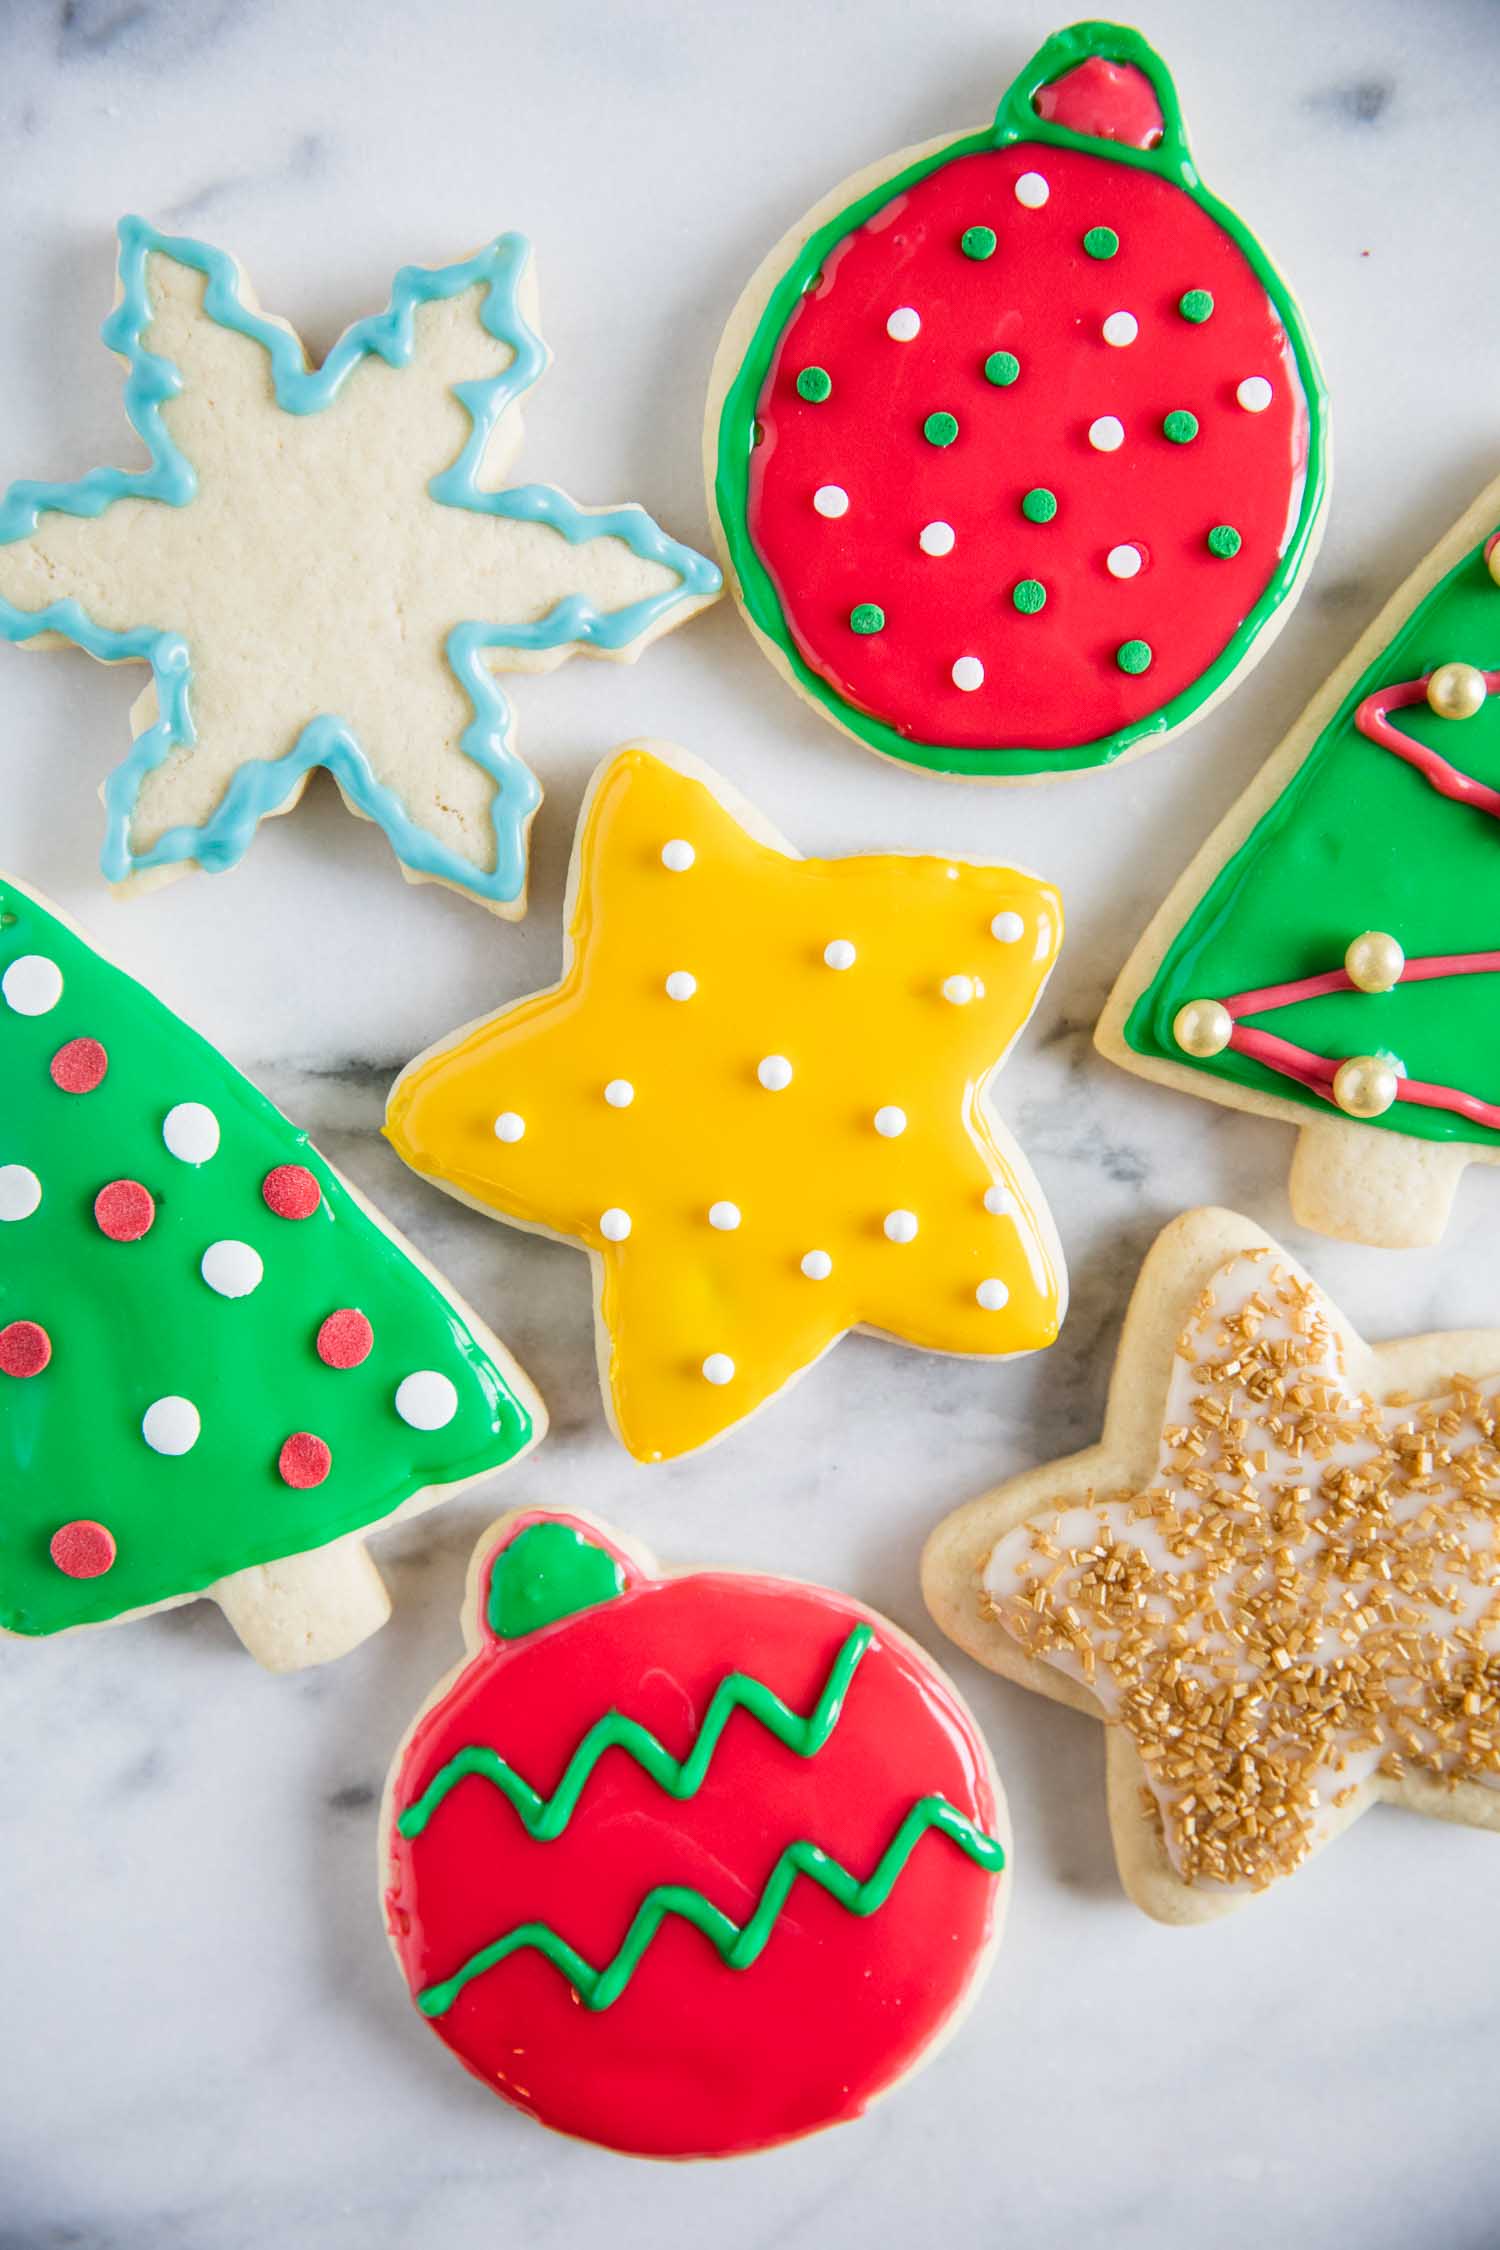 Can You Freeze Decorated Sugar Cookies? How To Store Royal Icing Cookies